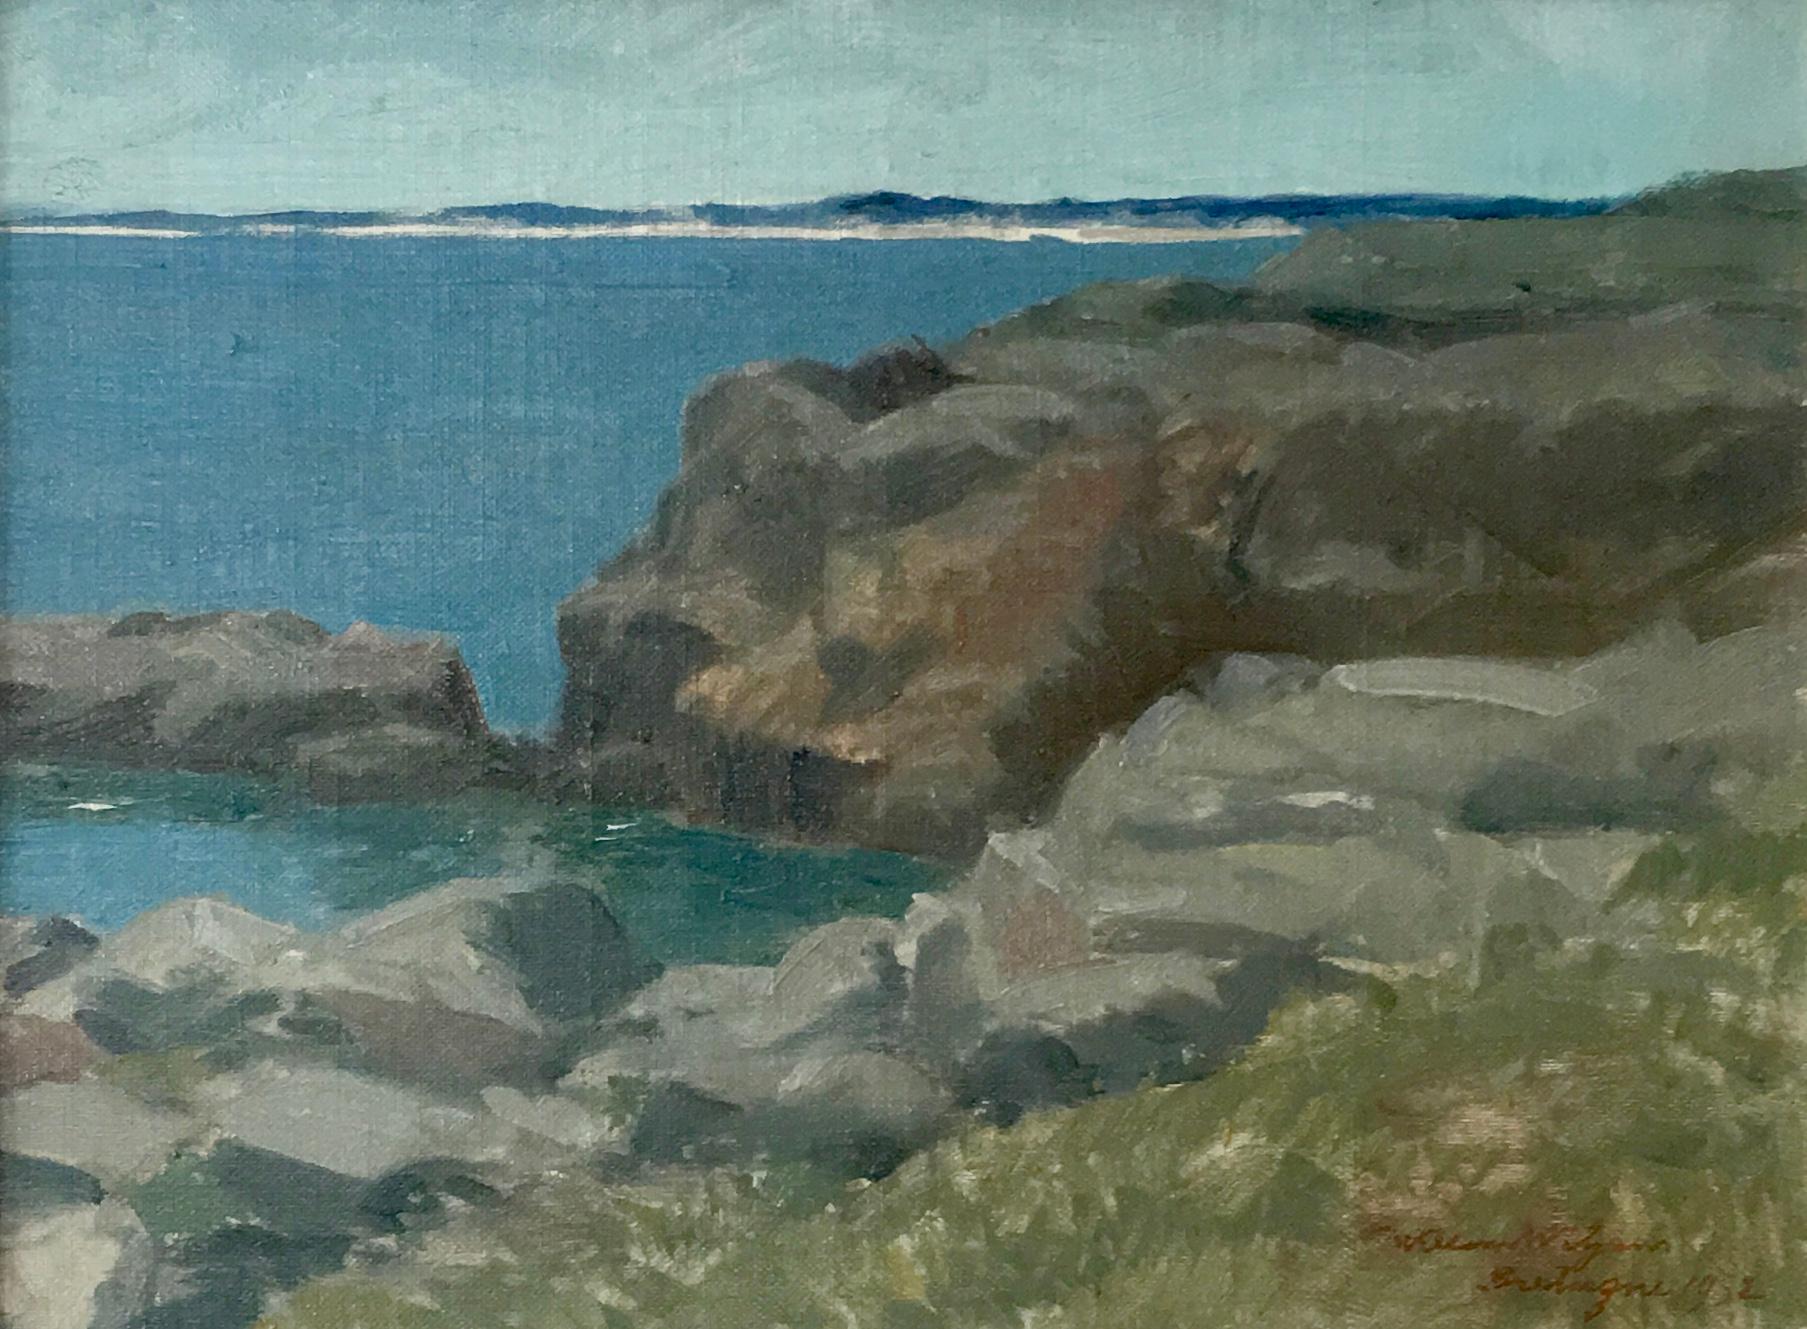 Willem Witjens painted this view on Bénodet coast in France. He must have been inspired by this impressive rocky coastline during one of his journeys. See the picture of the actual coastline close to Bénodet in Bretagne. This must be close to the